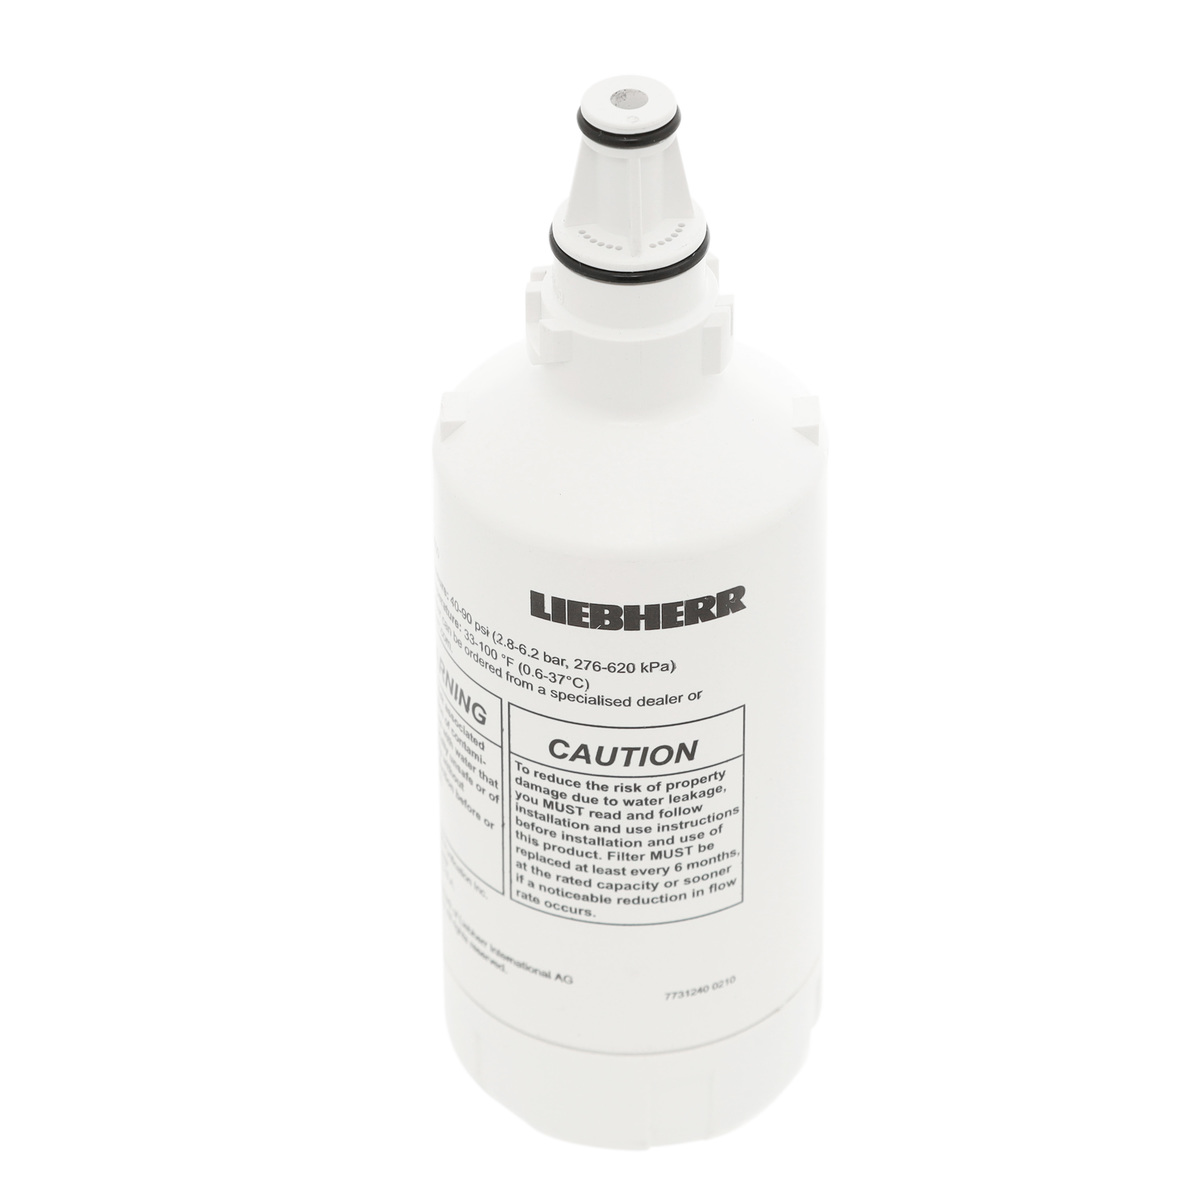 Liebherr Refrigerator Water Filter. Part #988098000  NO LONGER AVAILABLE to US